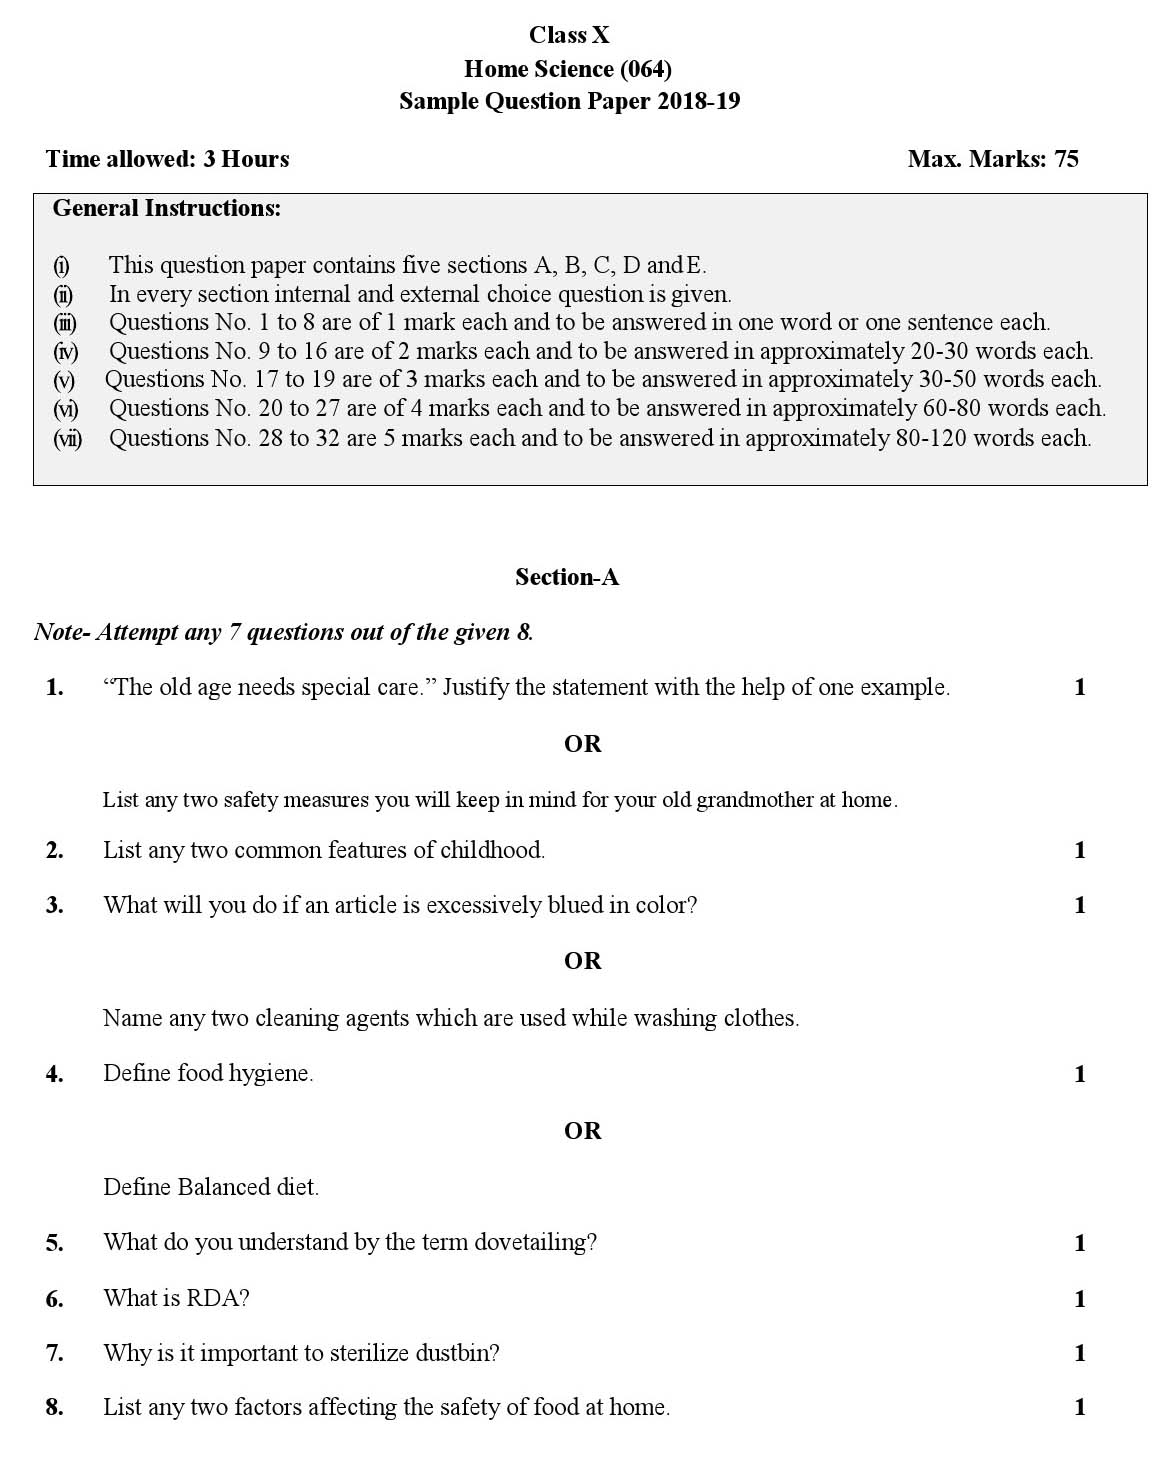 Home Science CBSE Class X Sample Question Paper 2018-19 - Image 1